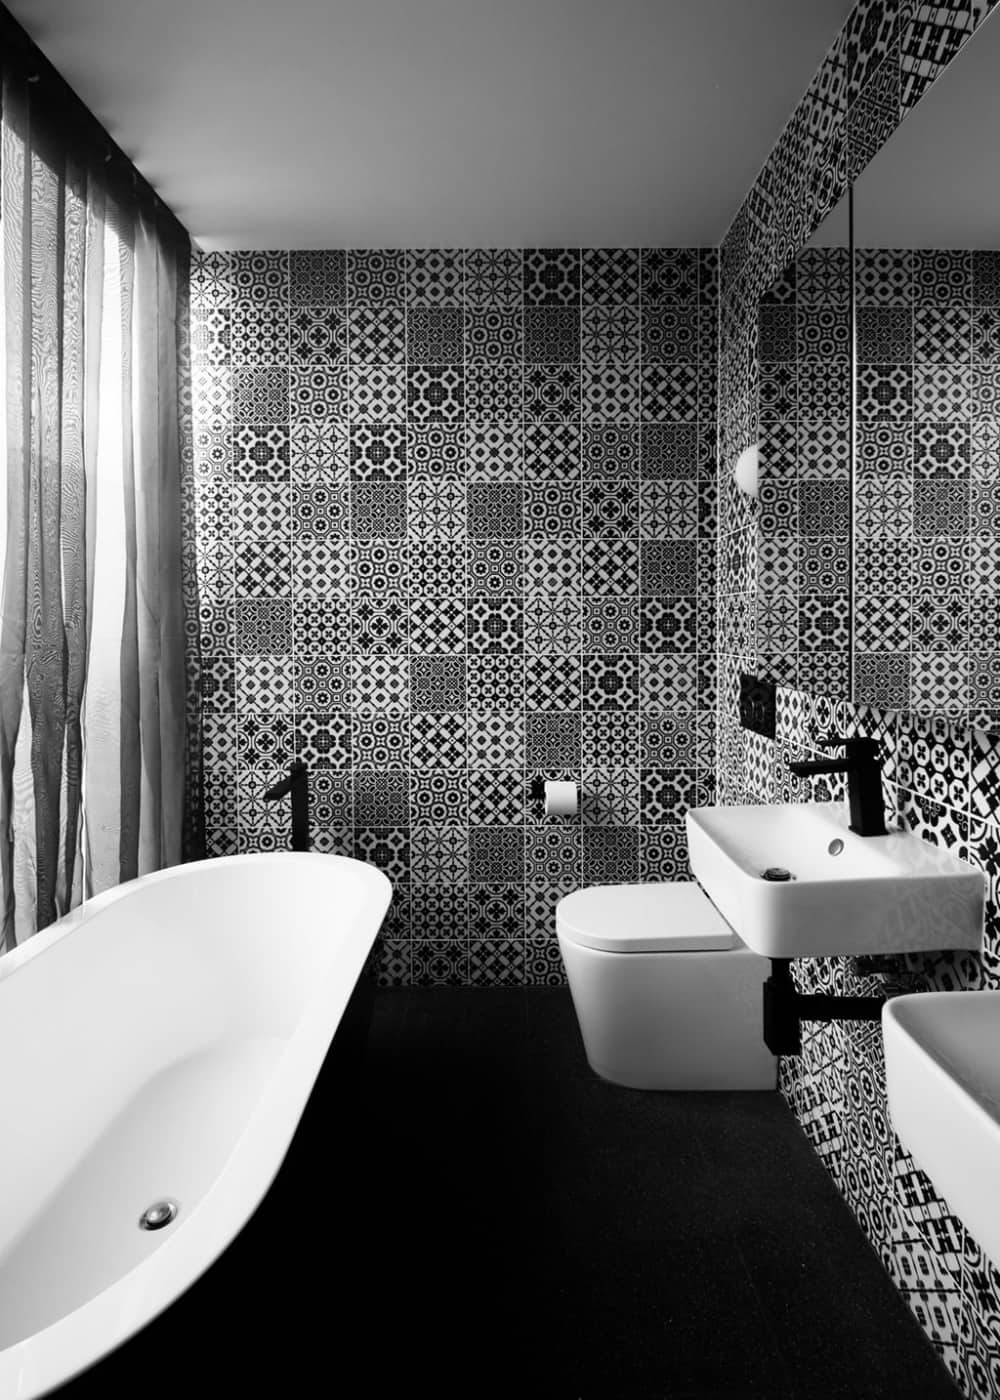 Black and white bathroom full of patterns